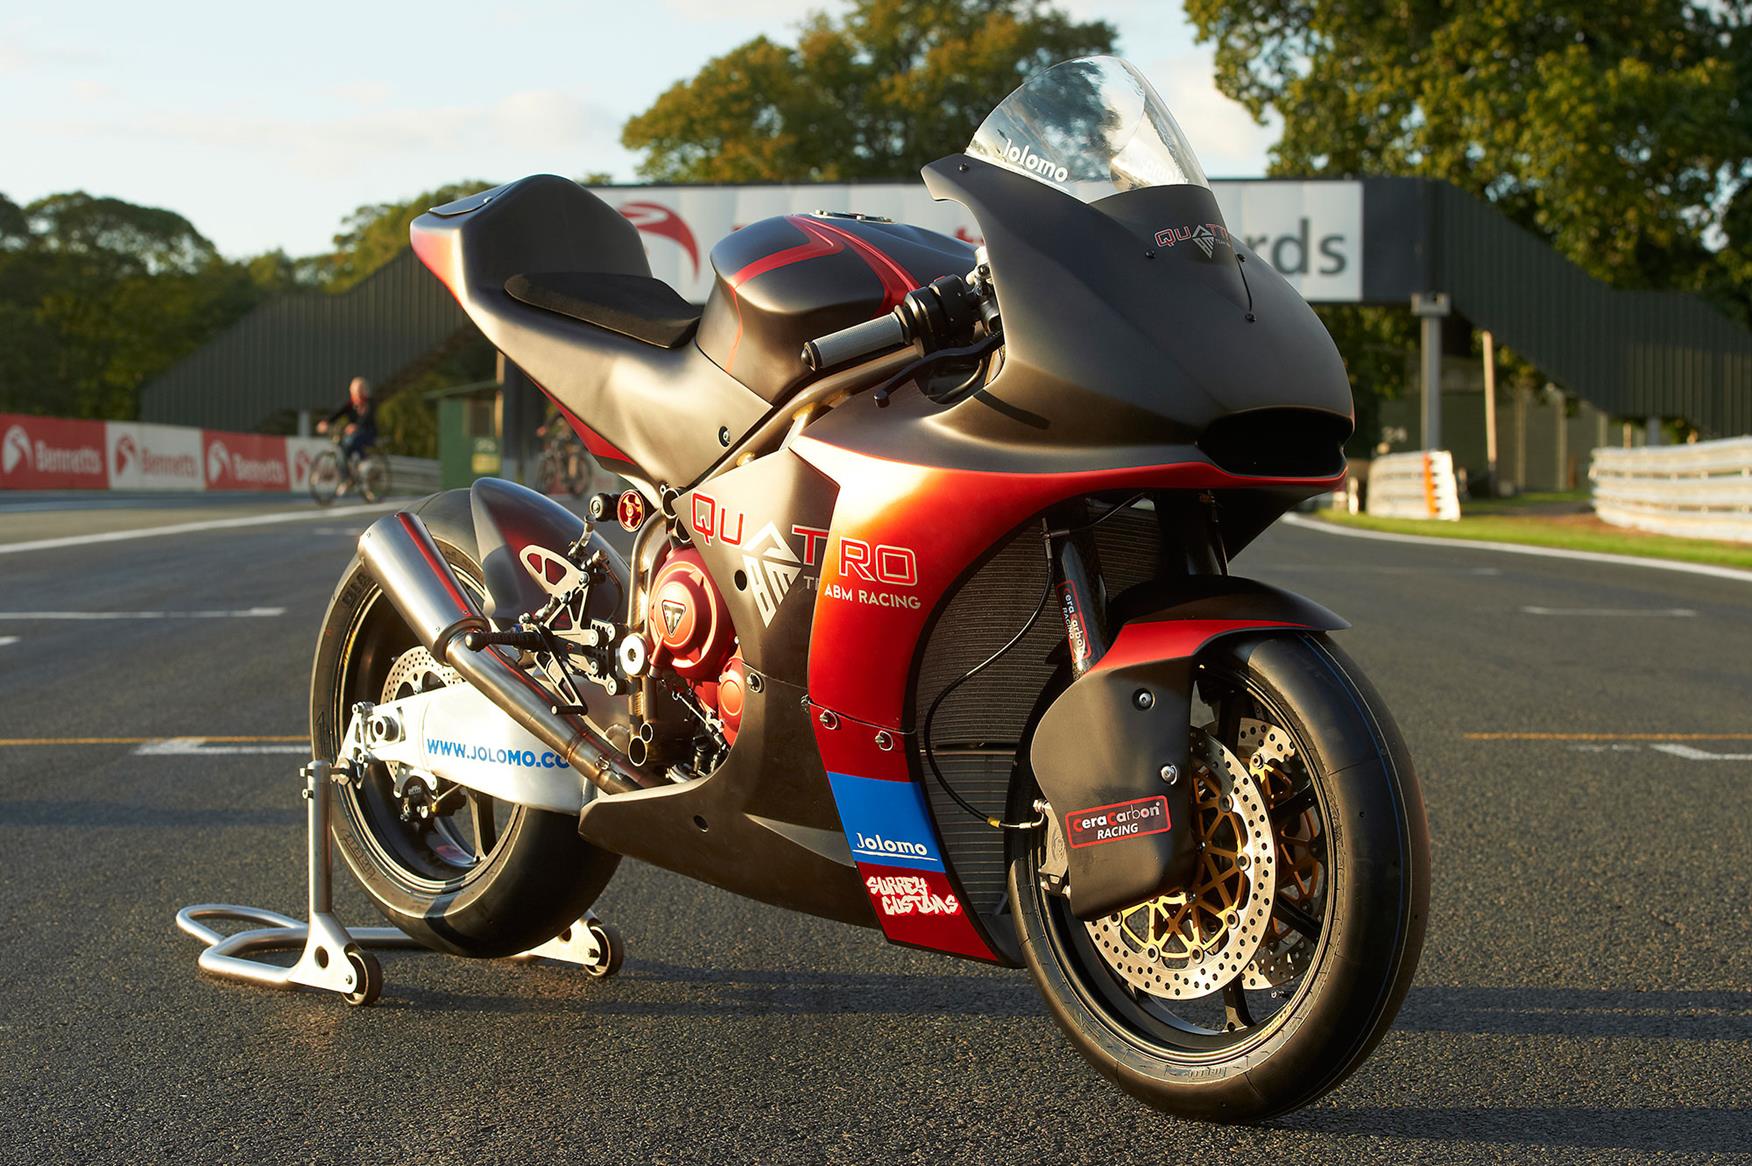 Associated British Motorcycles reveal radical new 765 Moto2 racer